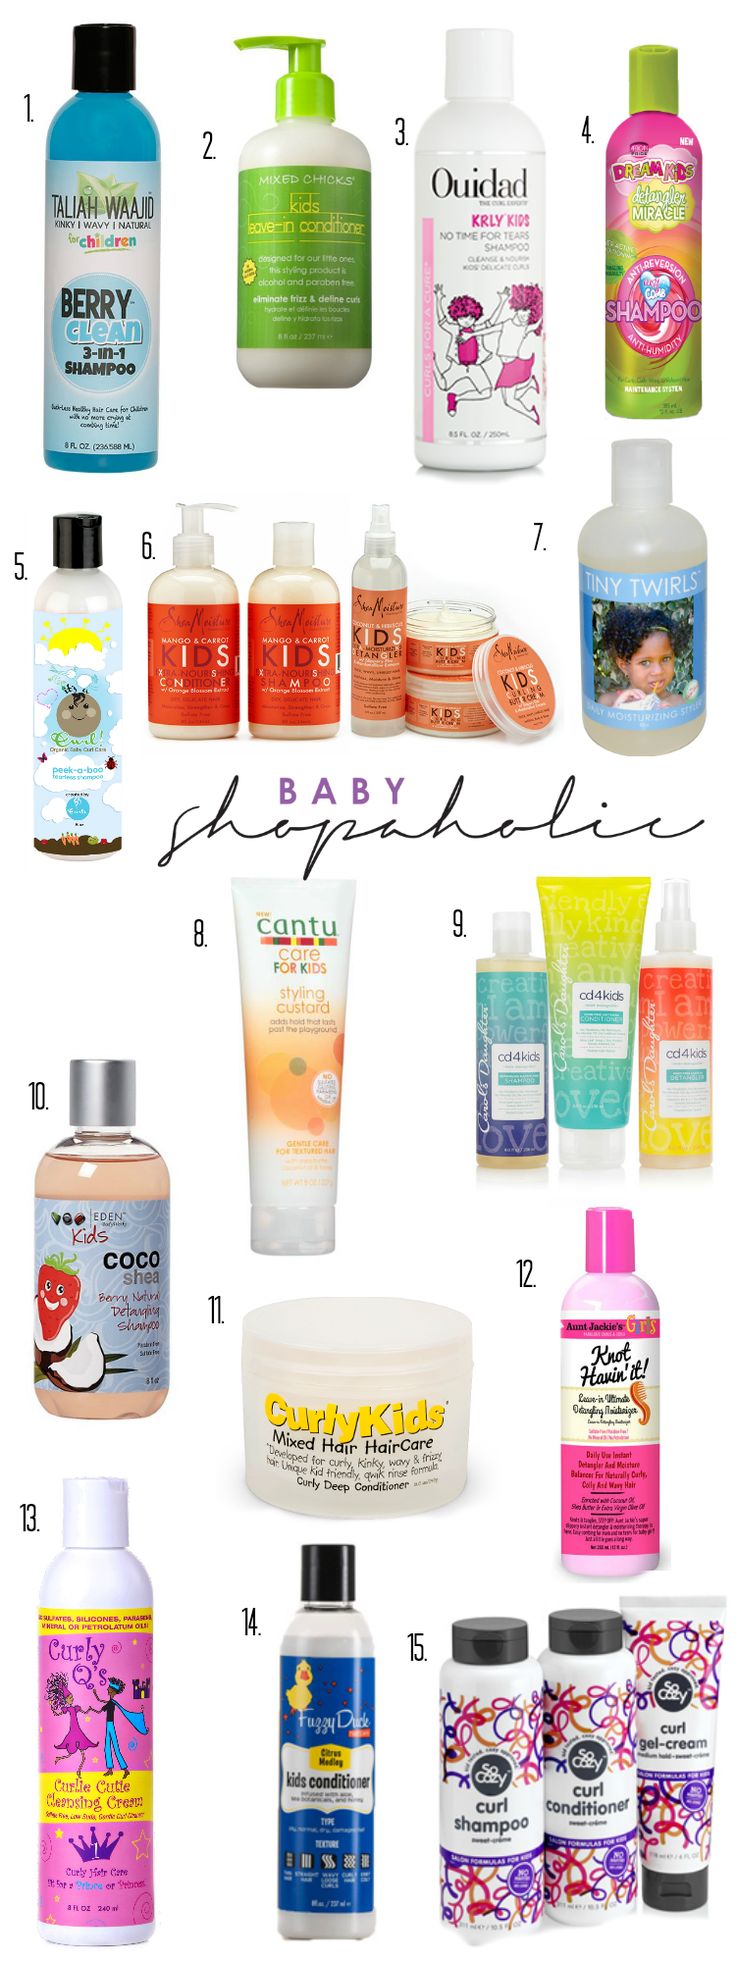 top hair care brands for curly and kinky haired babies and kids